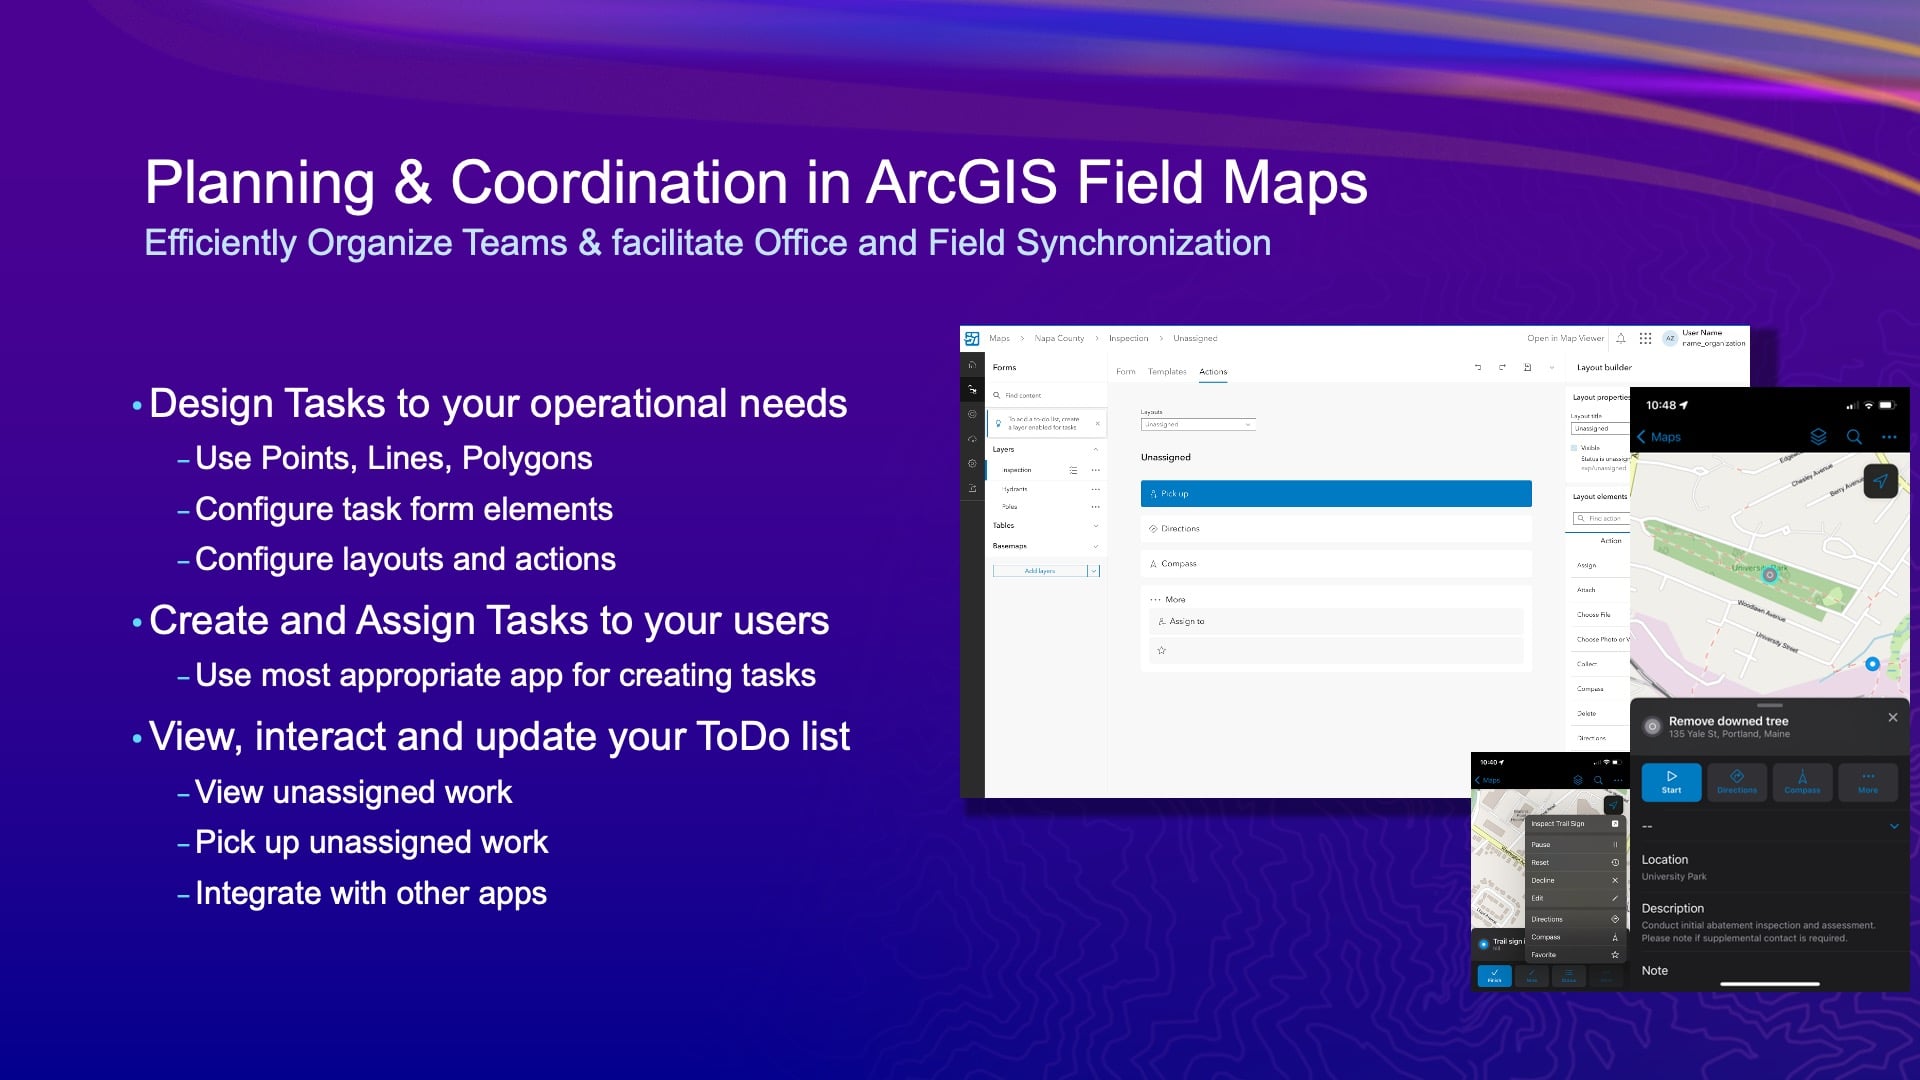 Planning and Configuration in ArcGIS Field Maps